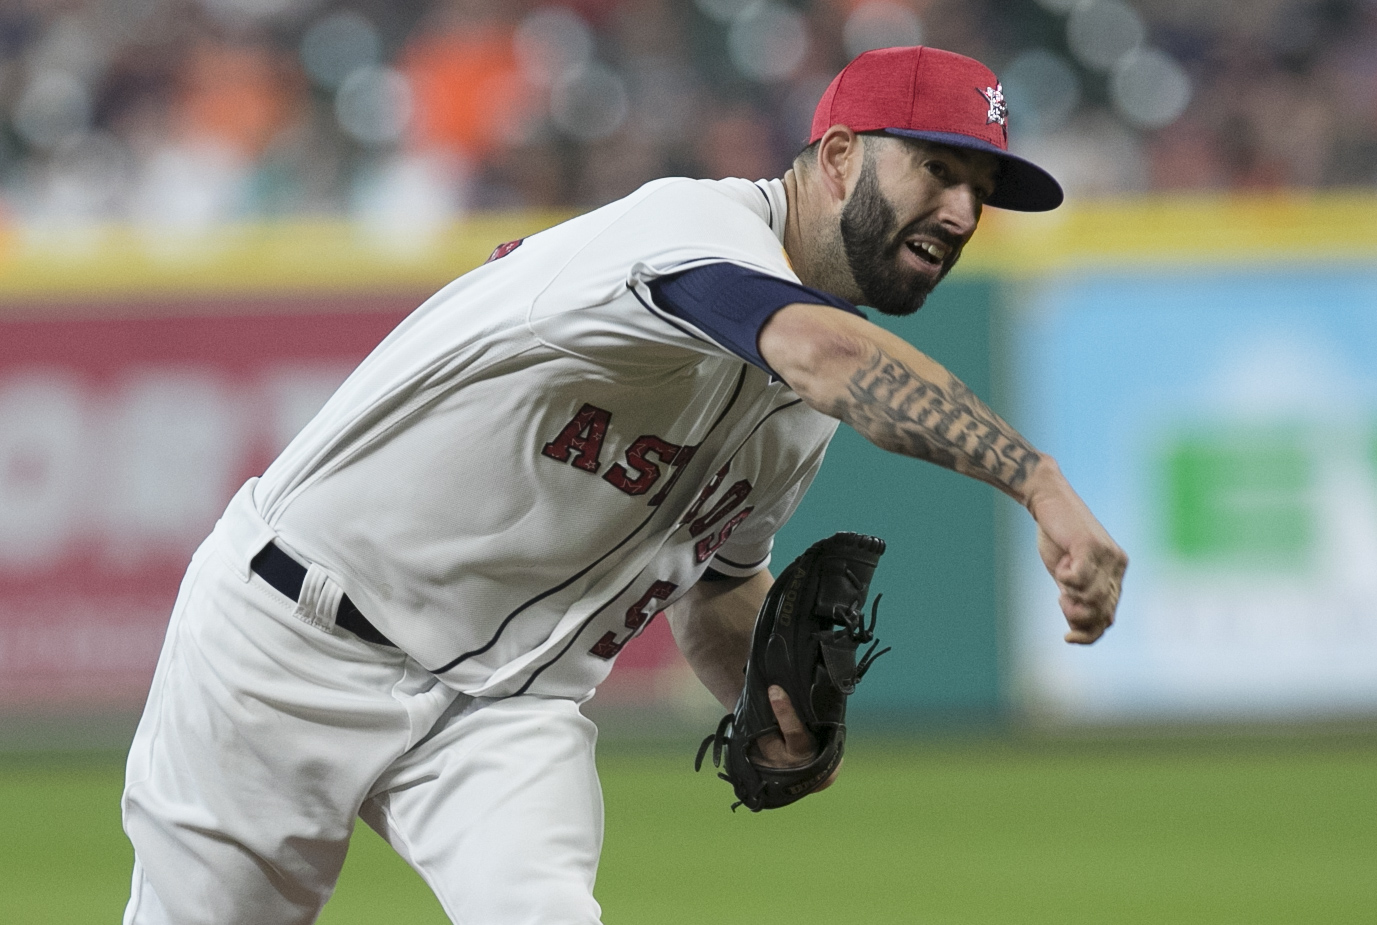 Mike Fiers the Astros' only nontender candidate as deadline looms